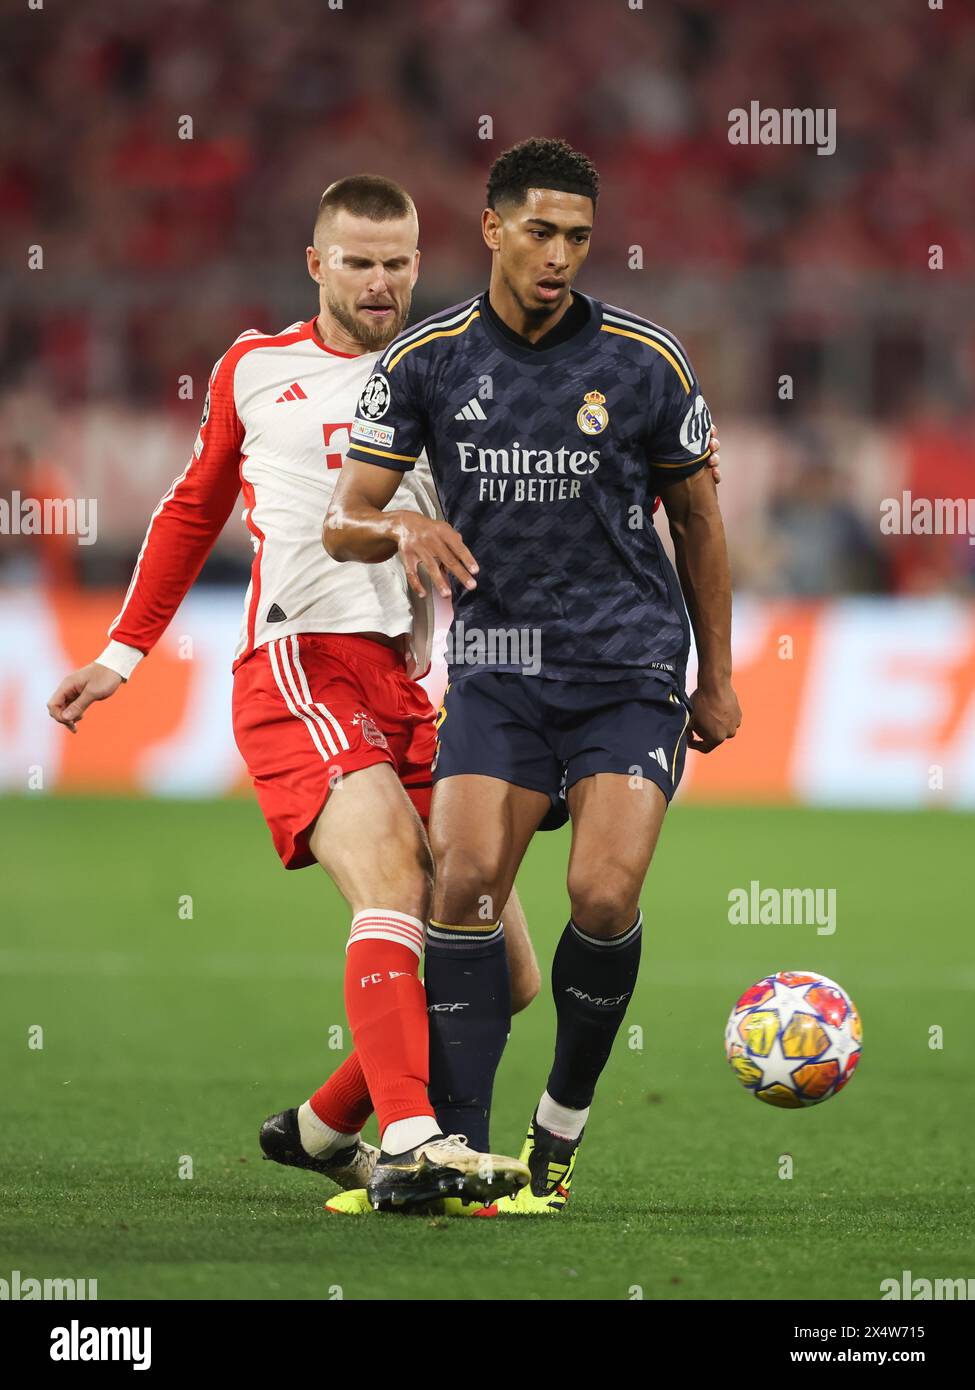 MUNICH, GERMANY - APRIL 30: Eric Dier of Bayern Muenchen vies with Jude Bellingham of Real Madrid during the UEFA Champions League semi-final first leg match between FC Bayern München and Real Madrid at Allianz Arena on April 30, 2024 in Munich, Germany. © diebilderwelt / Alamy Stock Stock Photo